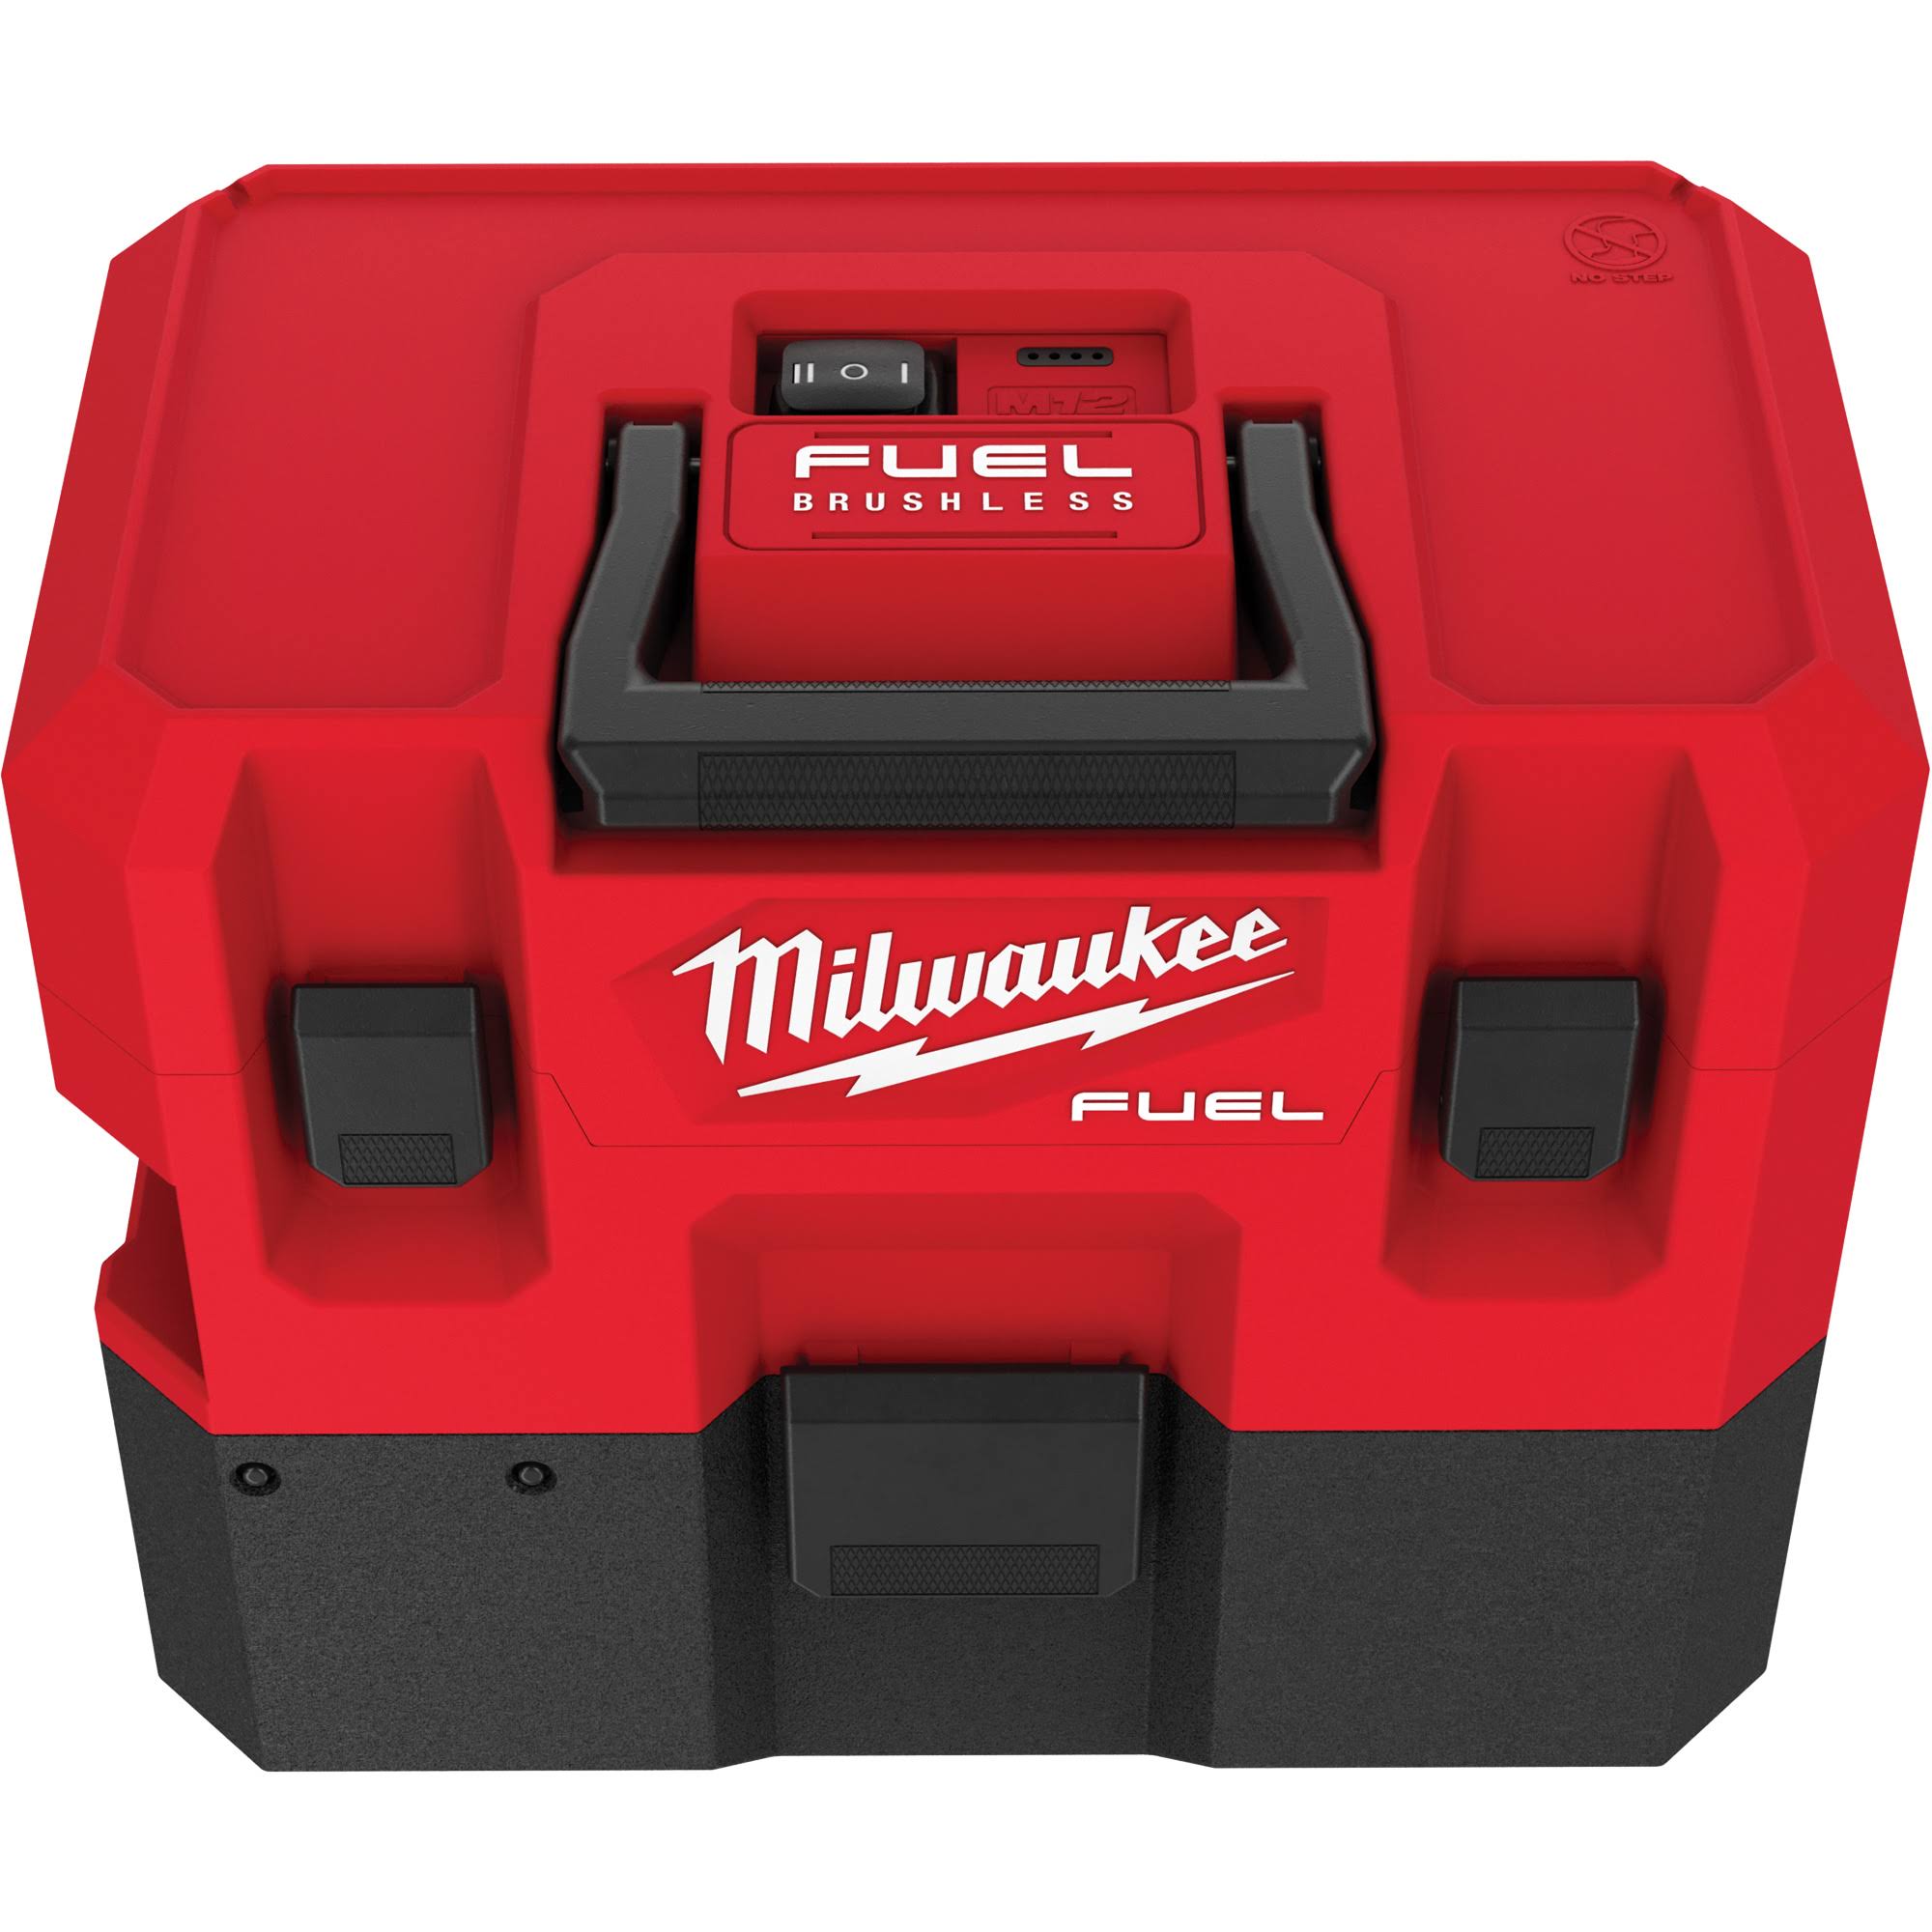 Milwaukee 0960-20 M12 FUEL 1.6 Gallon Wet/Dry Vacuum (Tool Only)